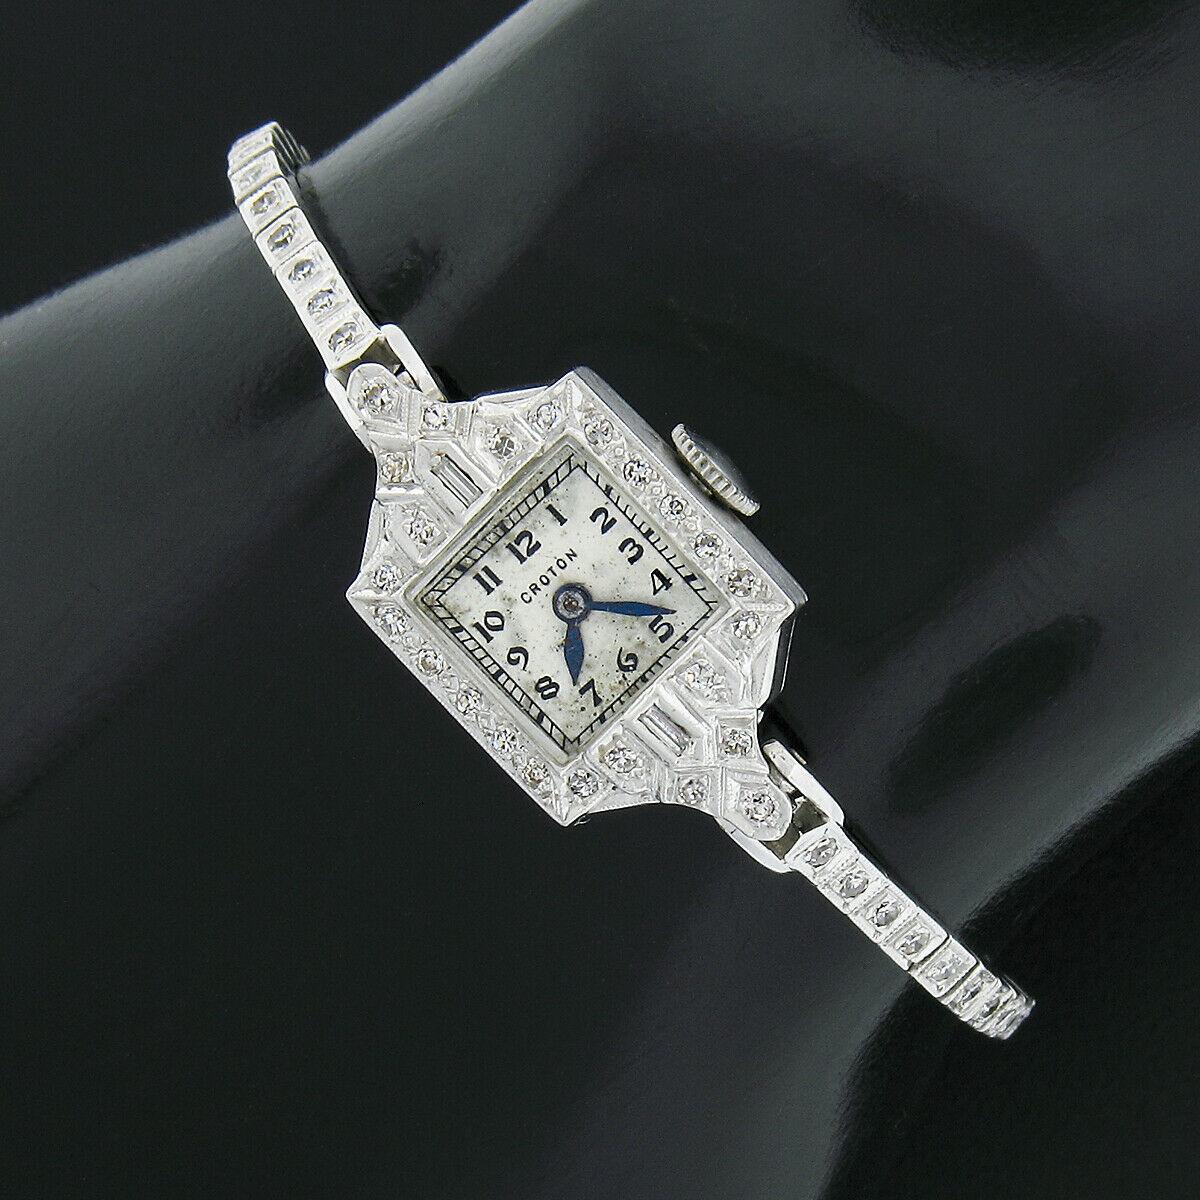 Here we have an antique ladies' wrist watch mounted in a solid platinum case and attached to a solid 14k white gold bracelet, both covered with approximately 0.69 carats of fine quality diamonds throughout. The bracelet features square milgrain